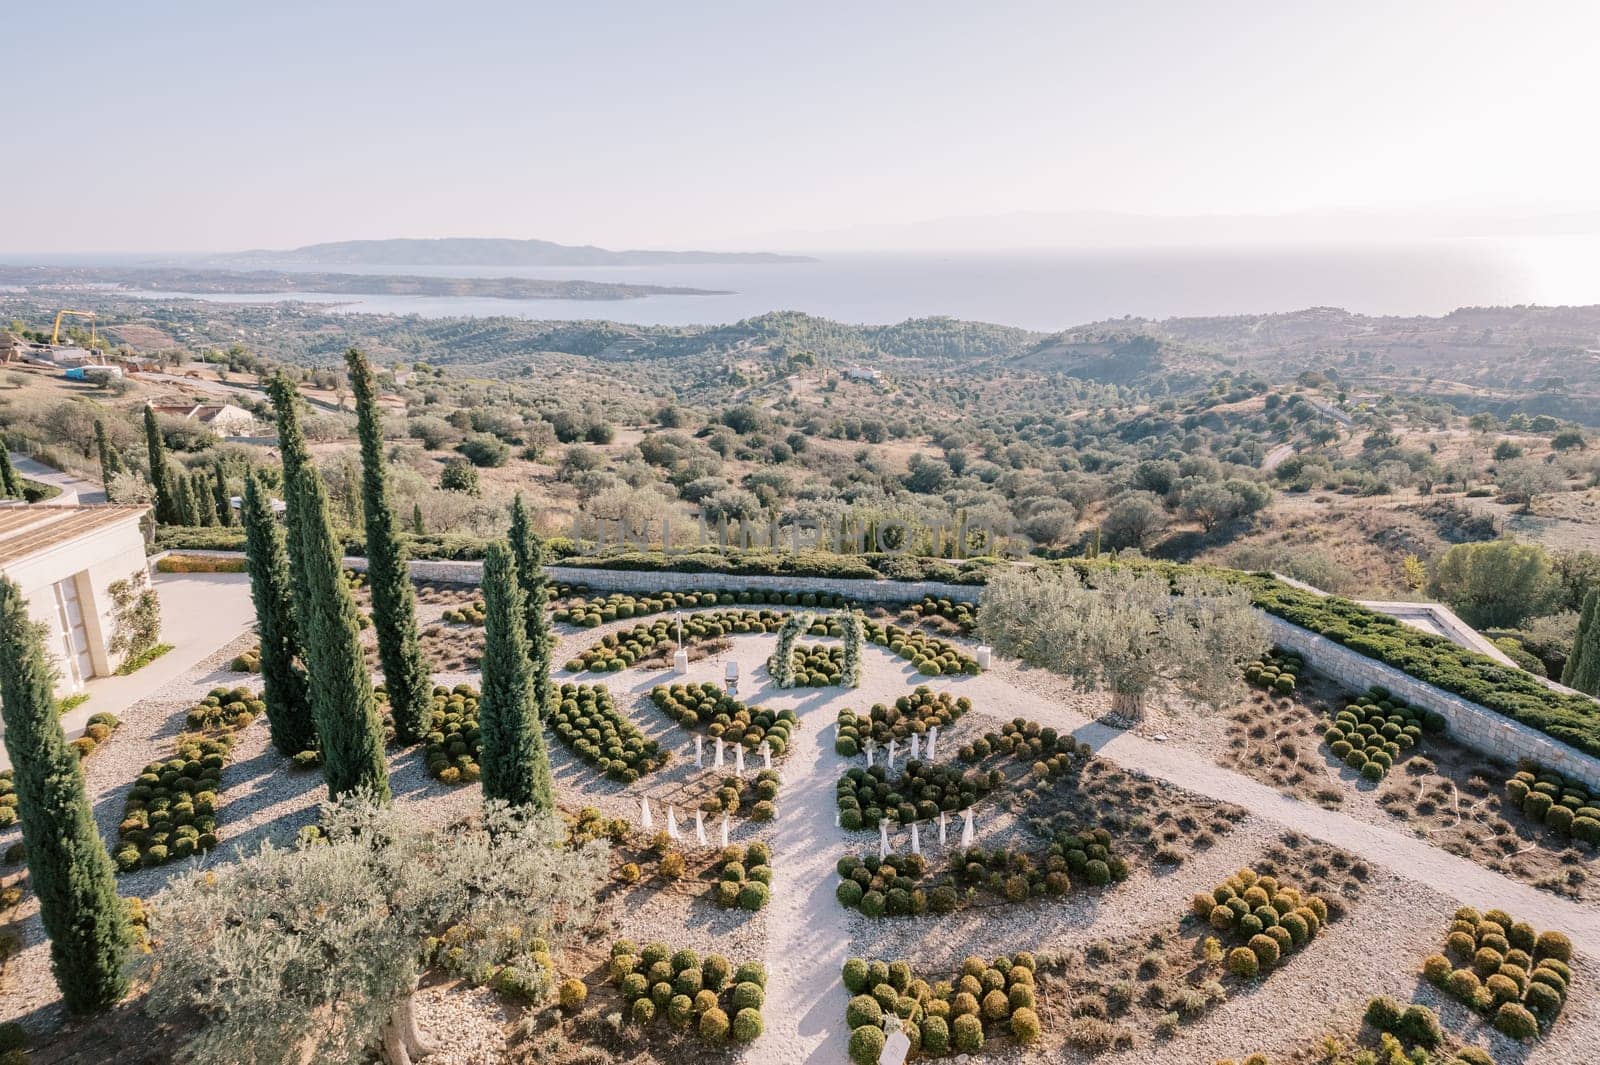 Sectoral garden with round bushes and tall trees on a mountainside. Hotel Amanzoe, Peloponnese, Greece. High quality photo